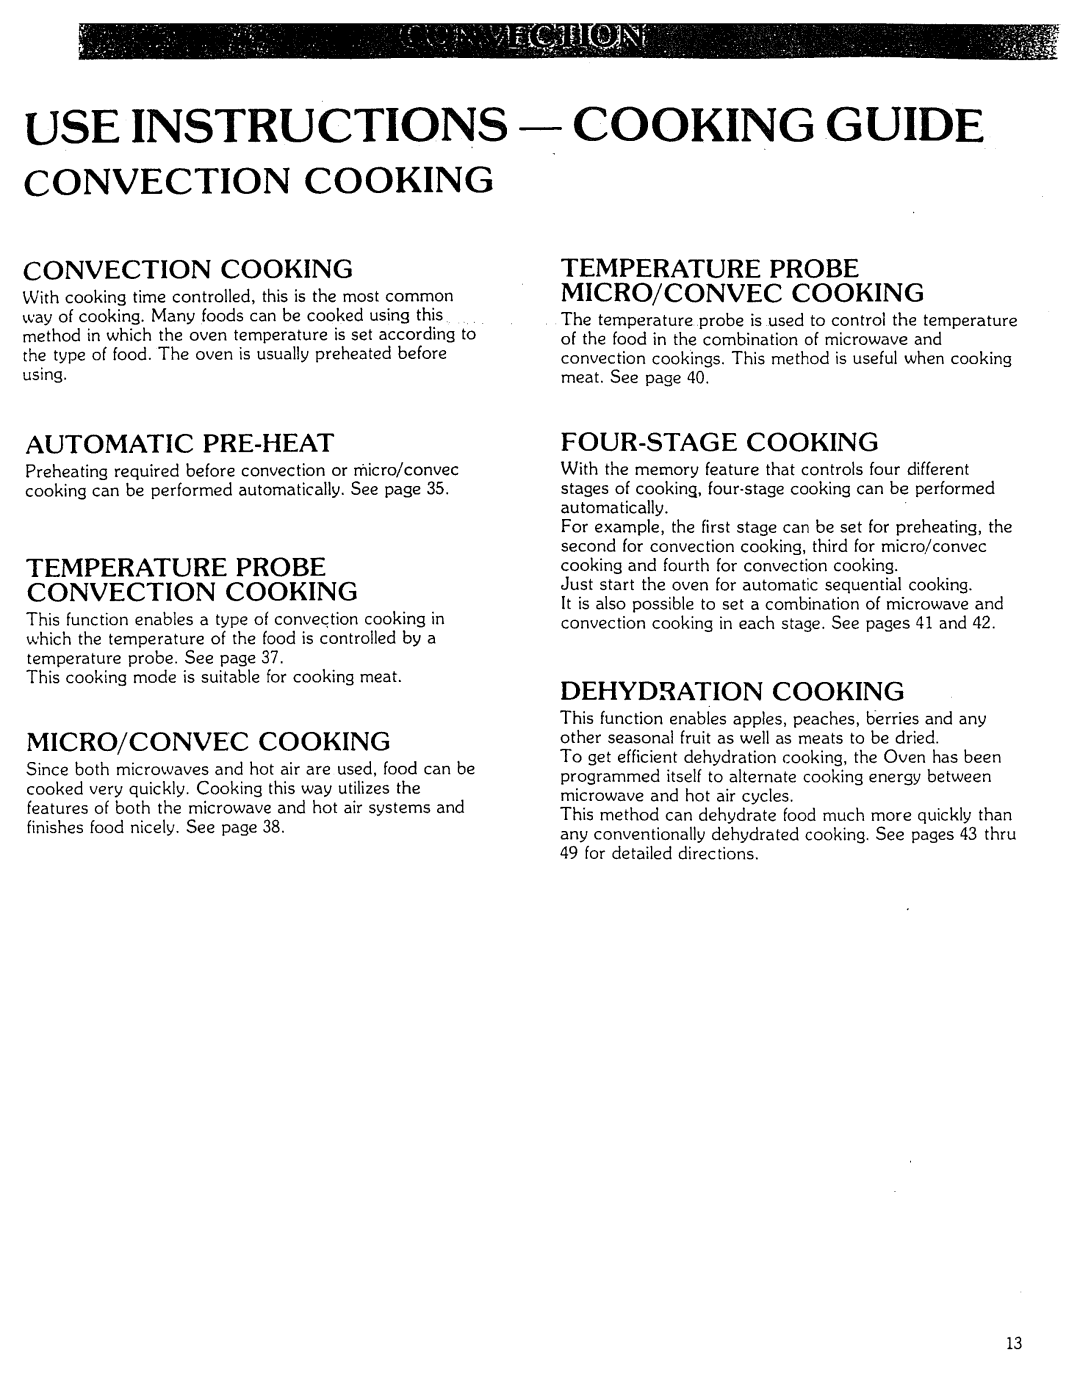 Kenmore Microwave Oven Cooking Guide, Convection Cooking, Automatic Pre-Heat, Micro/Convec Cooking, Temperature Probe 